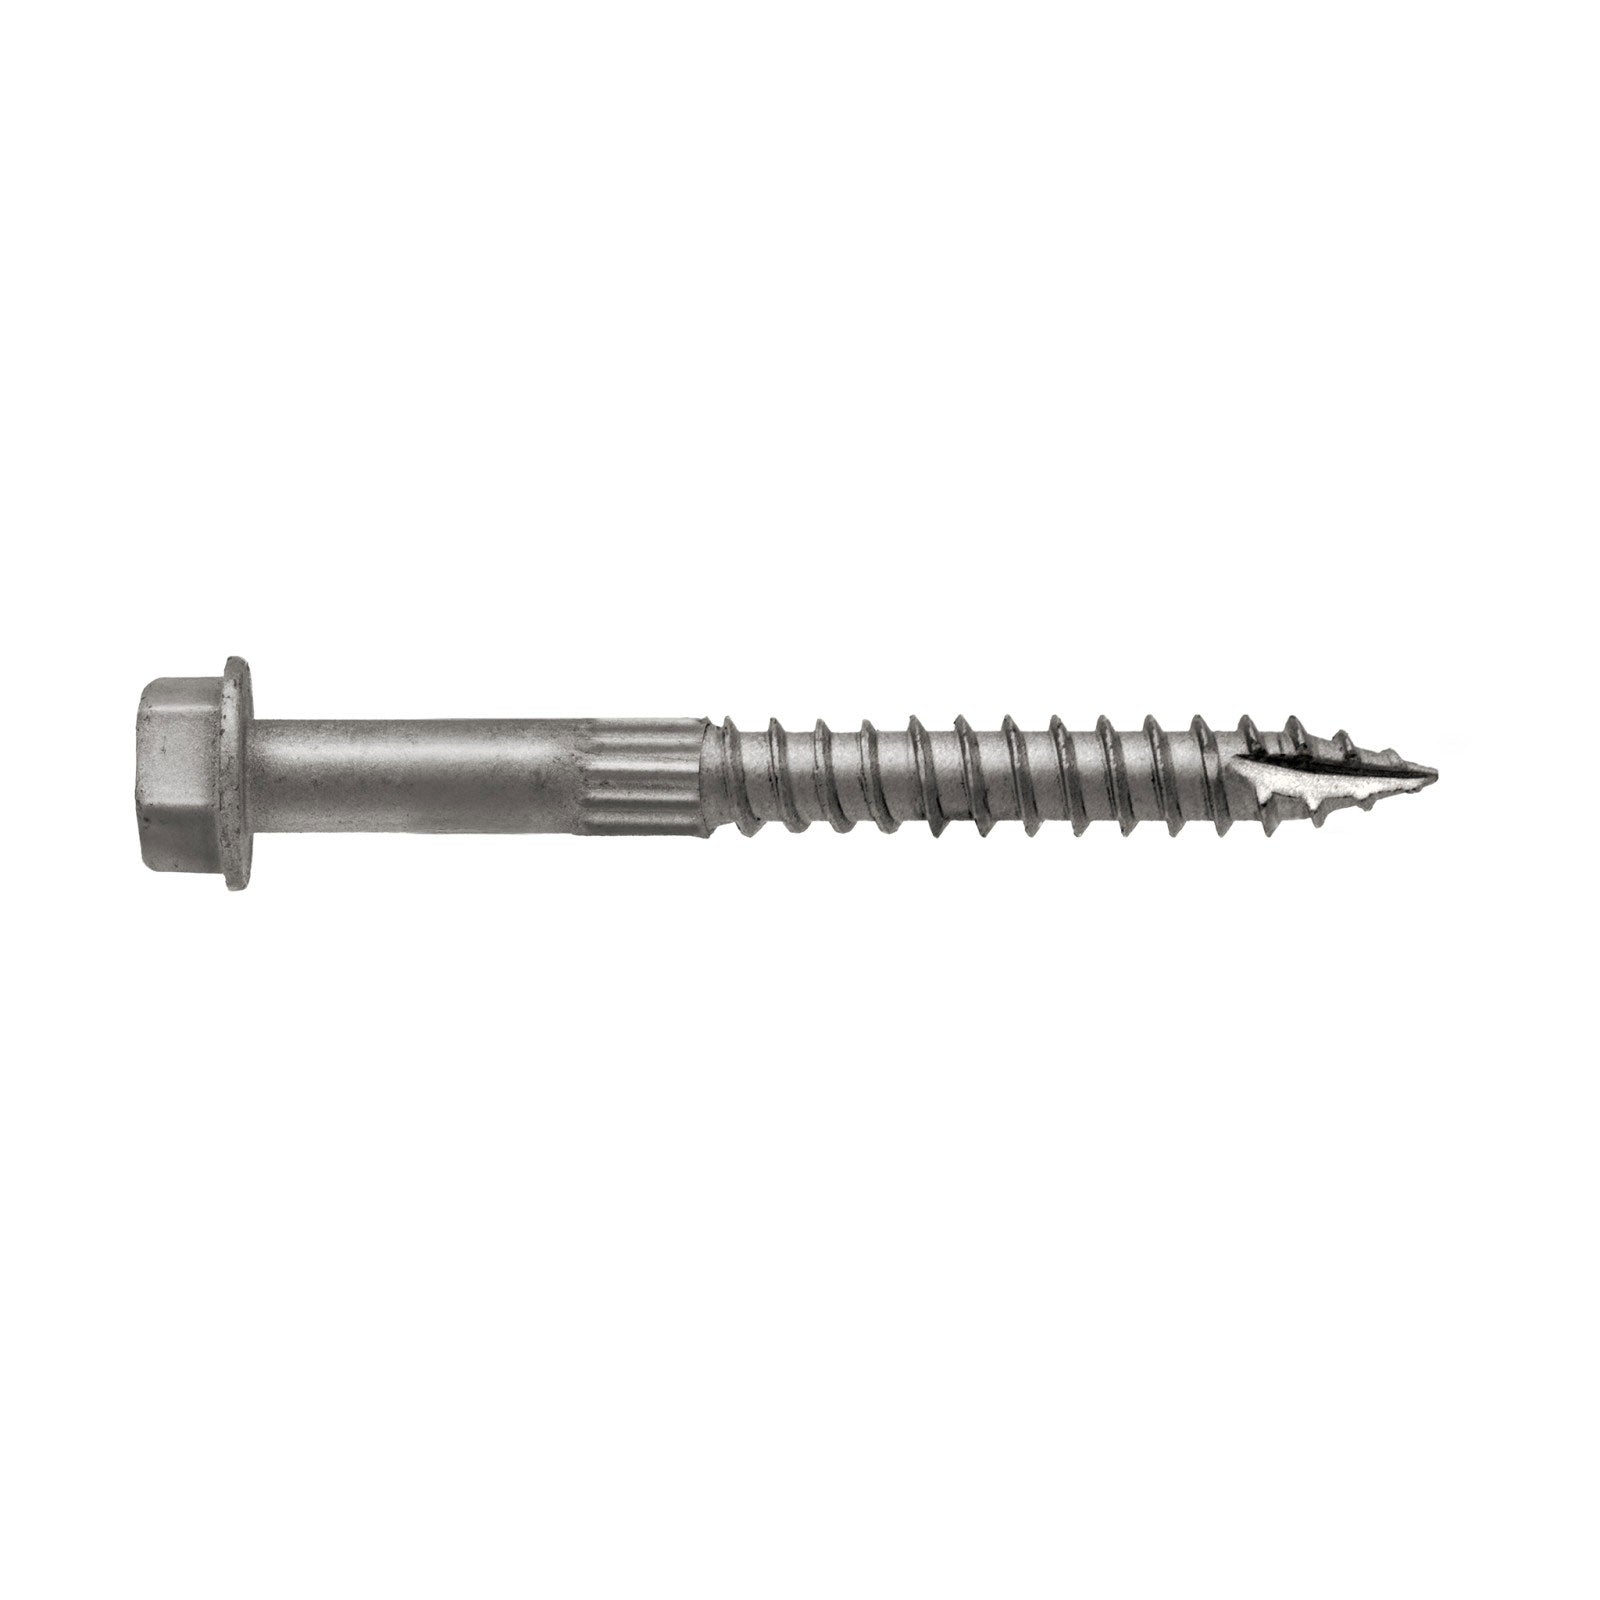 1/4" x 2-1/2" Strong-Tie SDS25212SS-R25 Heavy-Duty Connector Screw - 316 Stainless Steel